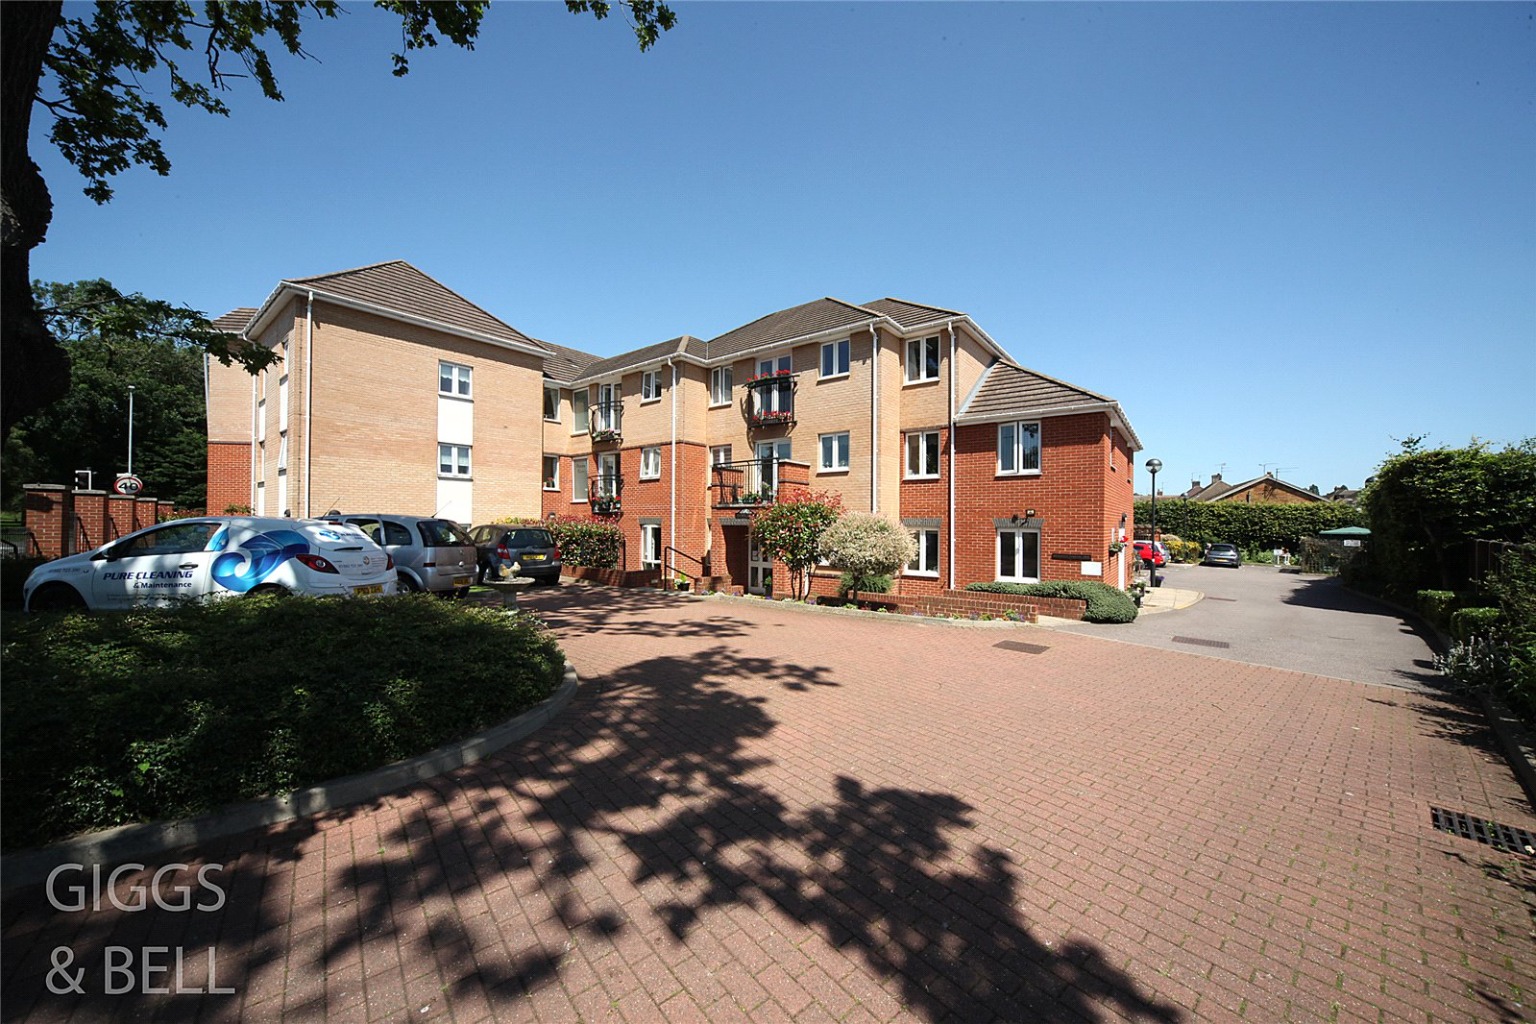 1 bed flat for sale in Cannon Lane, Luton - Property Image 1